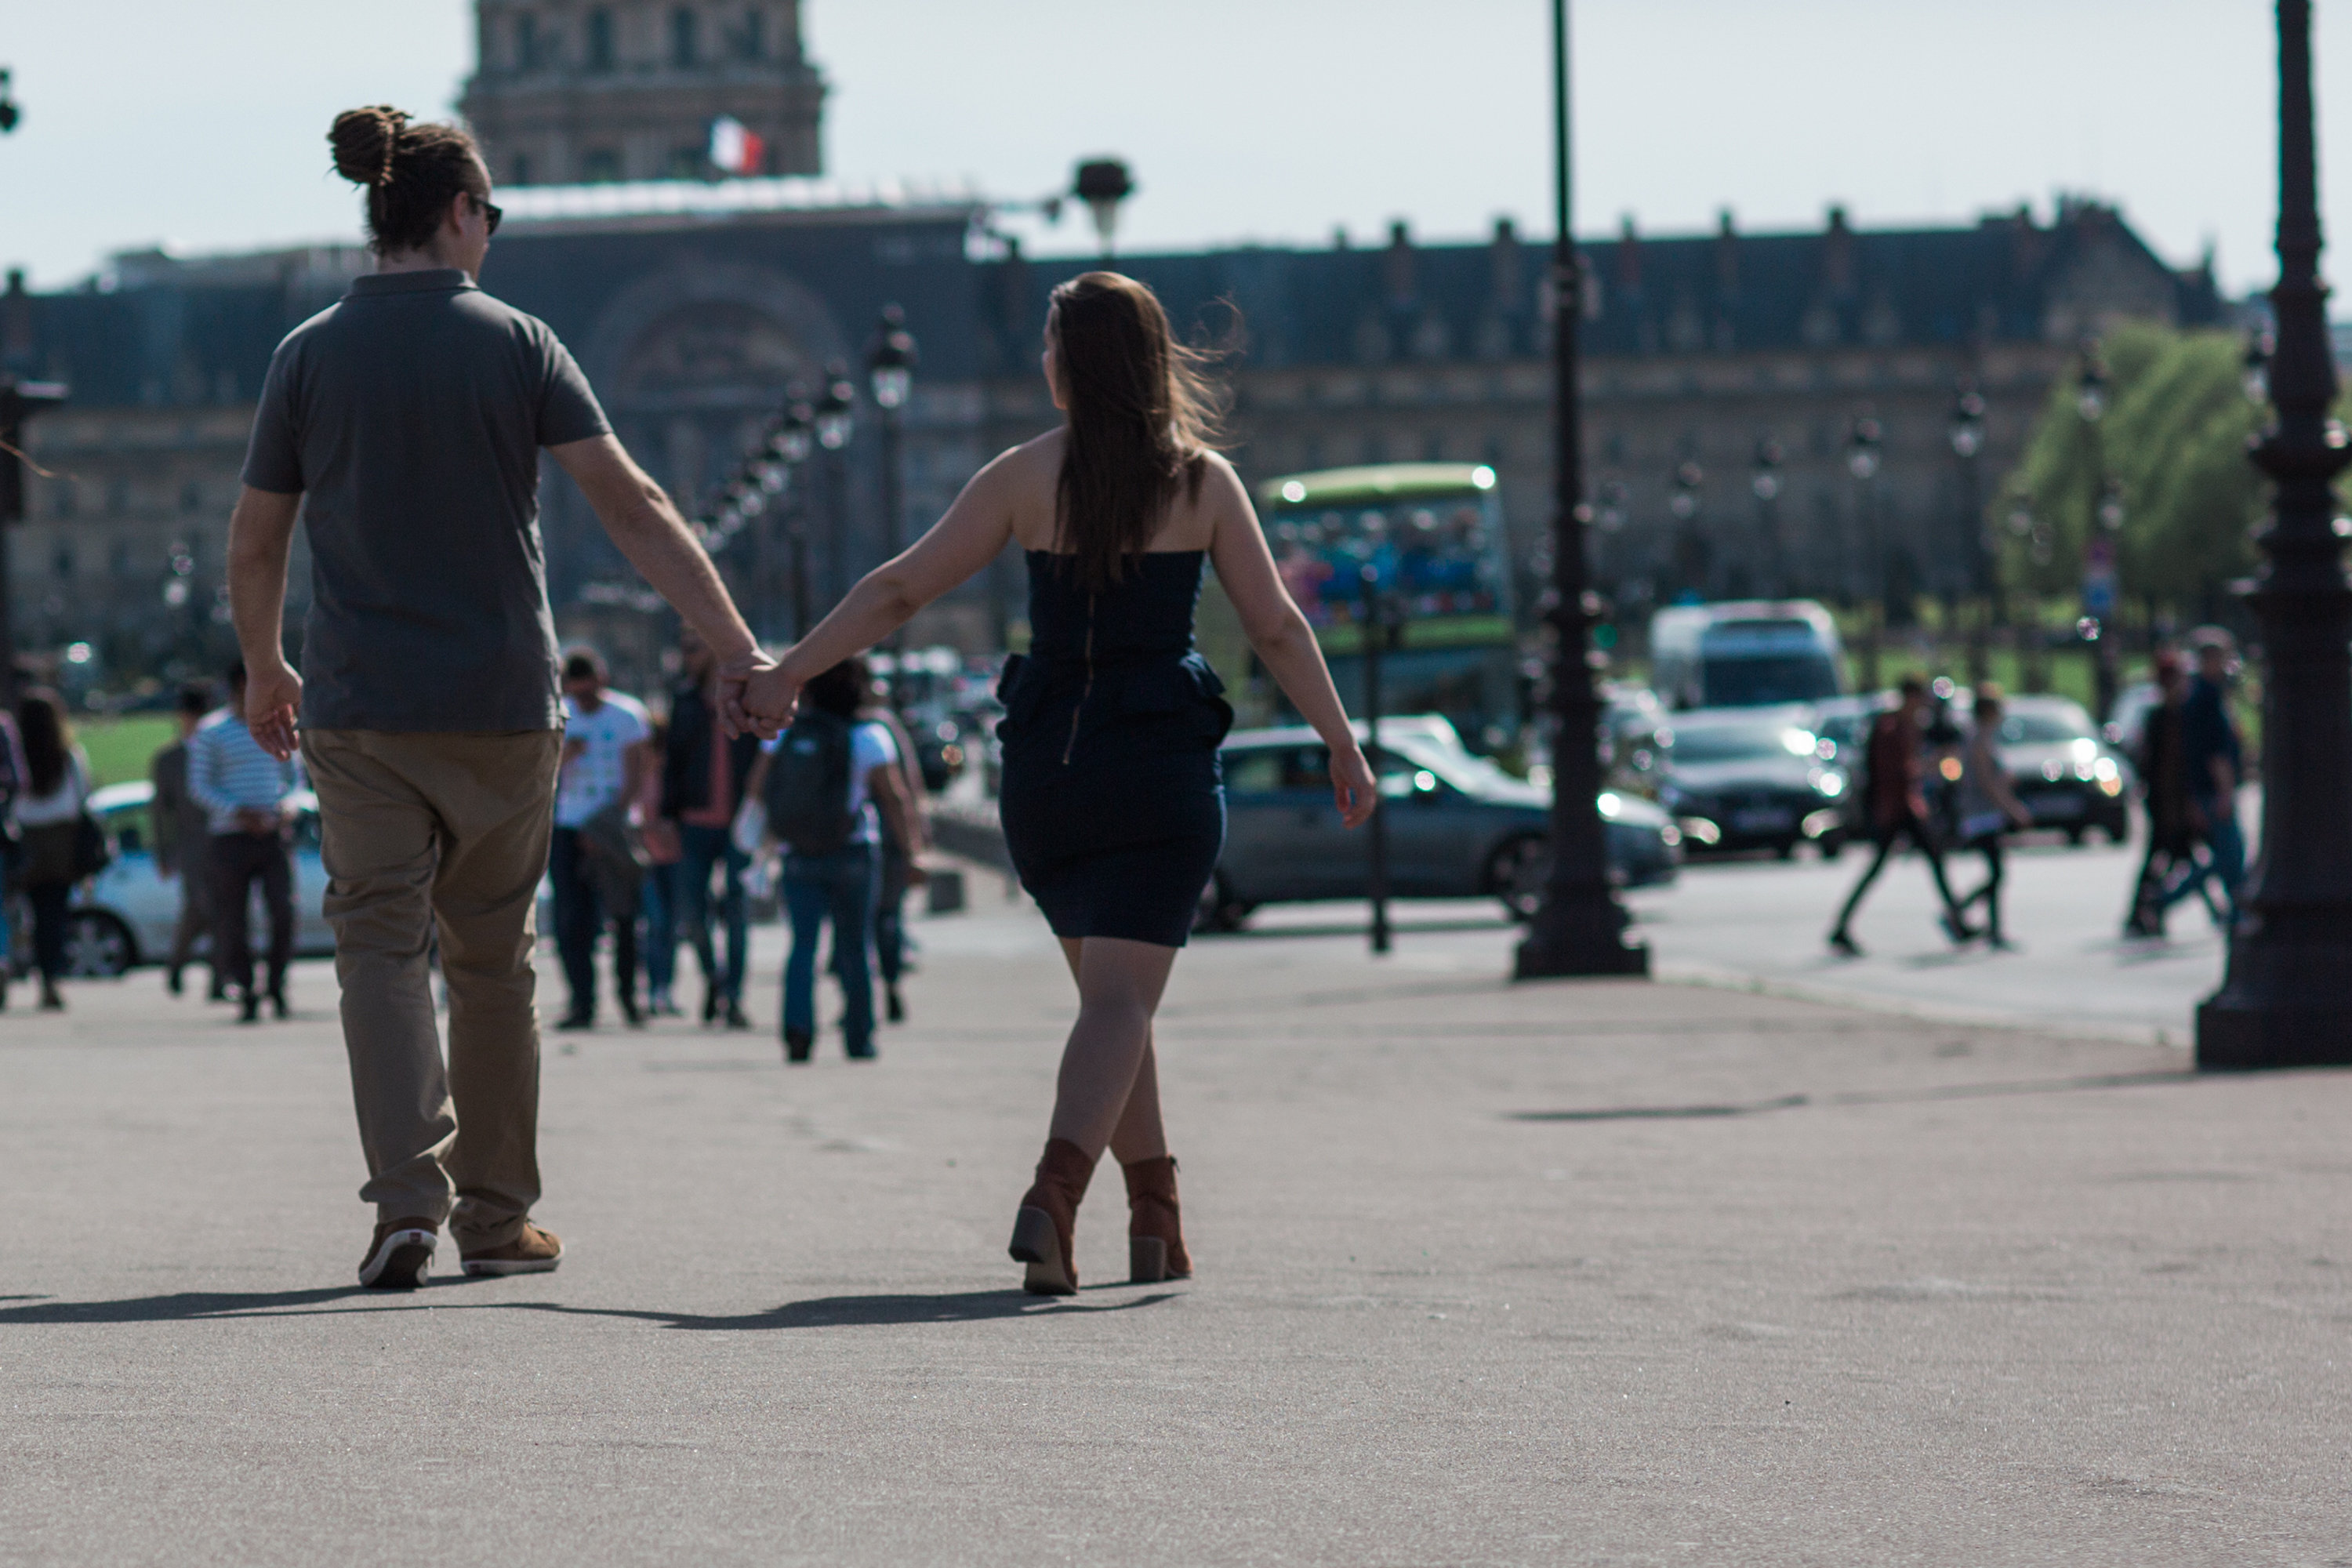 engagement-photoshoot-dvvevents- getting married in paris 48